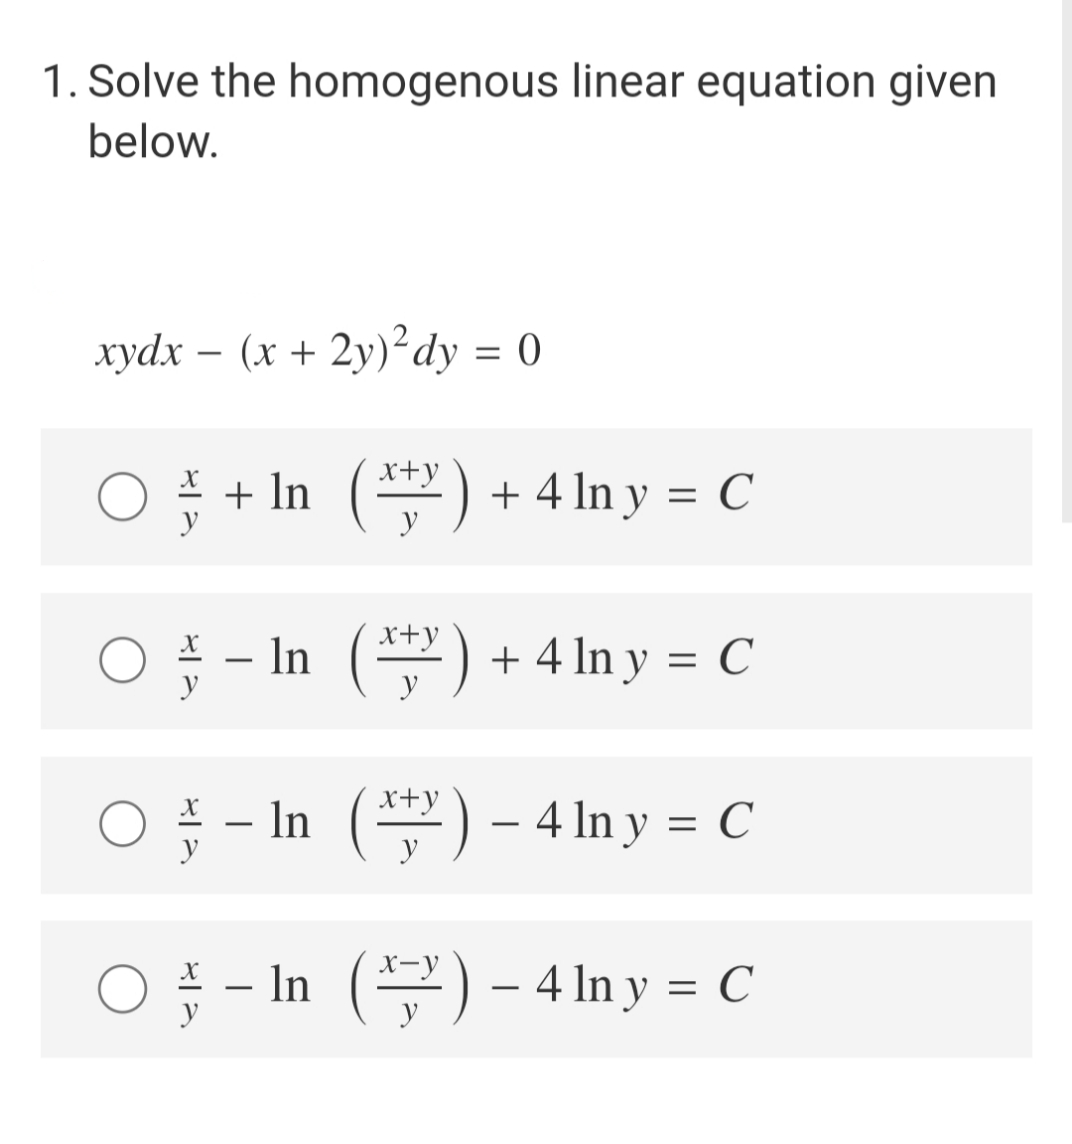 1. Solve the homogenous linear equation given
below.
xydx- (x + 2y)² dy = 0
O + In
+ ln (x+³) + 4 ln y = C
x+y
○ In (¹) + 4 ln y = C
y
- In (*) – 4 ln y = C
y
O-In ()-4 ln y = C
y